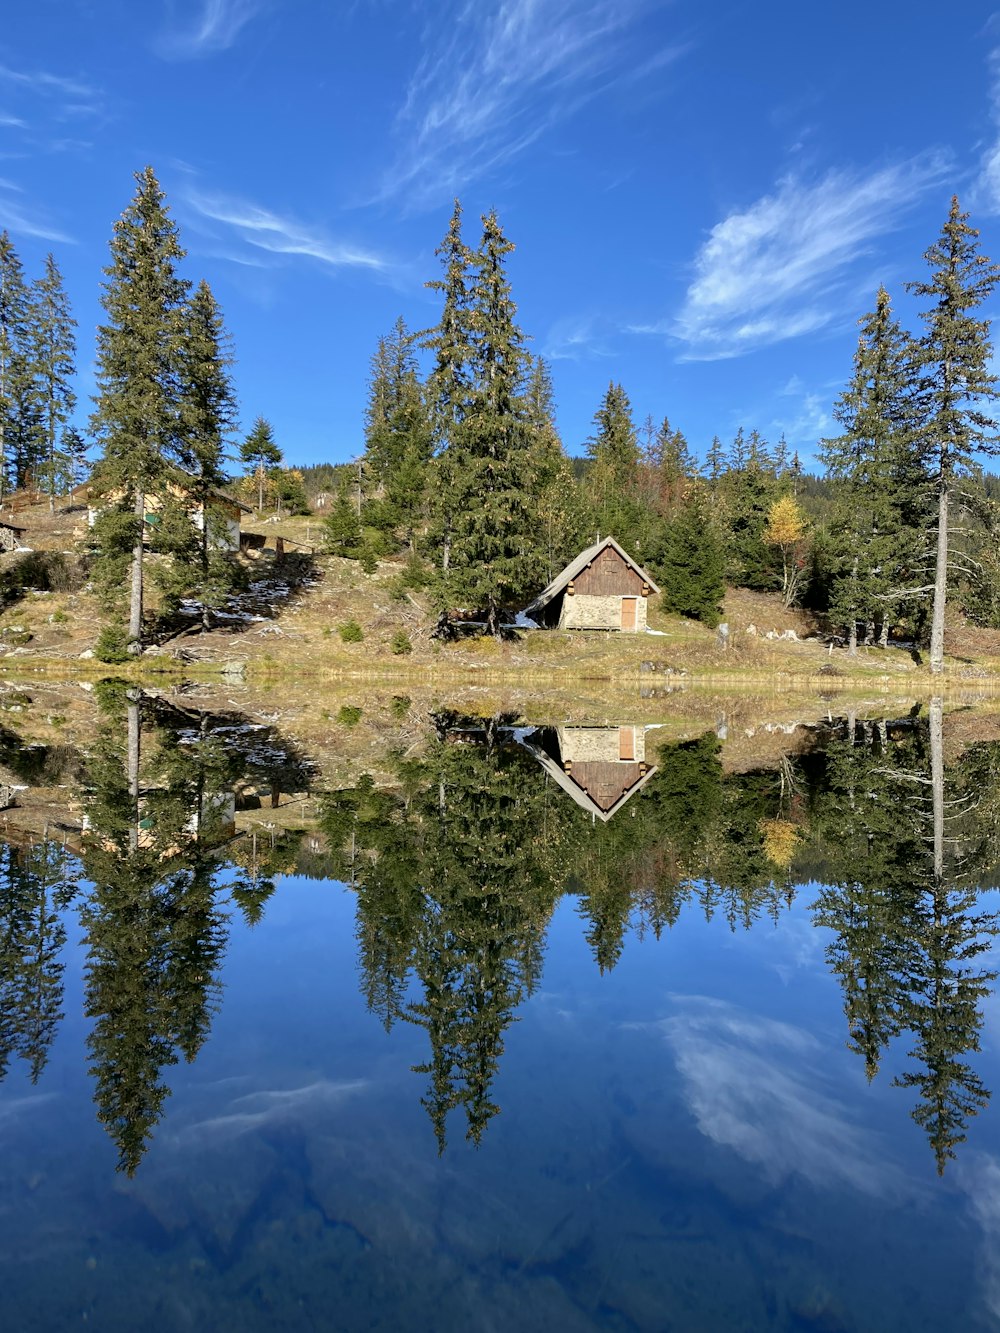 brown wooden house near green trees and lake under blue sky during daytime